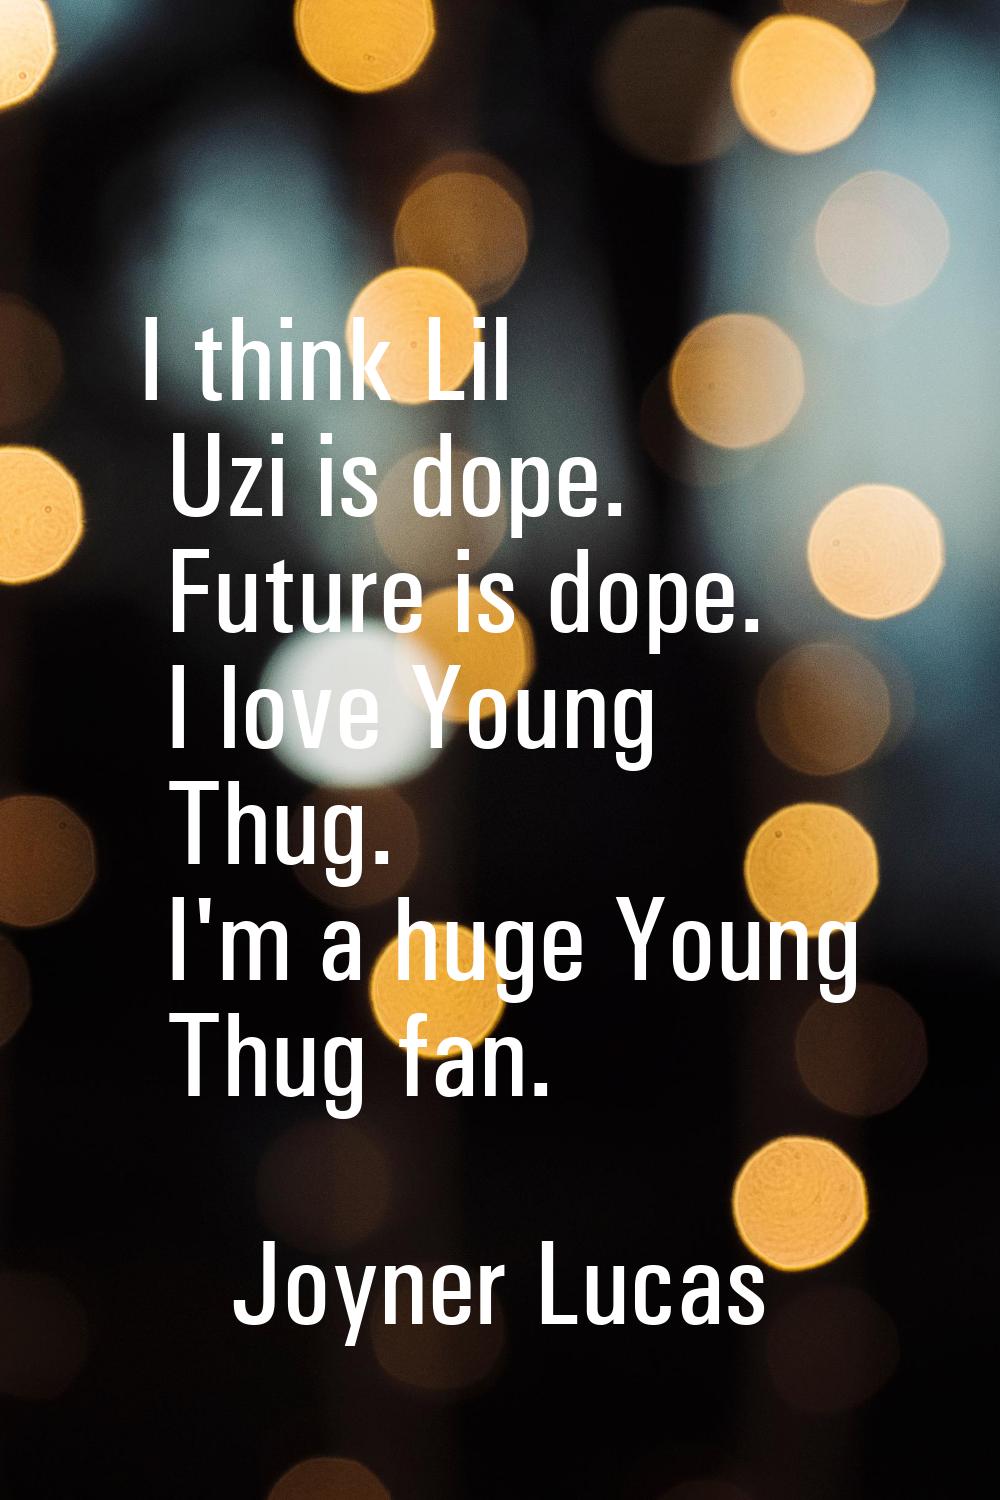 I think Lil Uzi is dope. Future is dope. I love Young Thug. I'm a huge Young Thug fan.